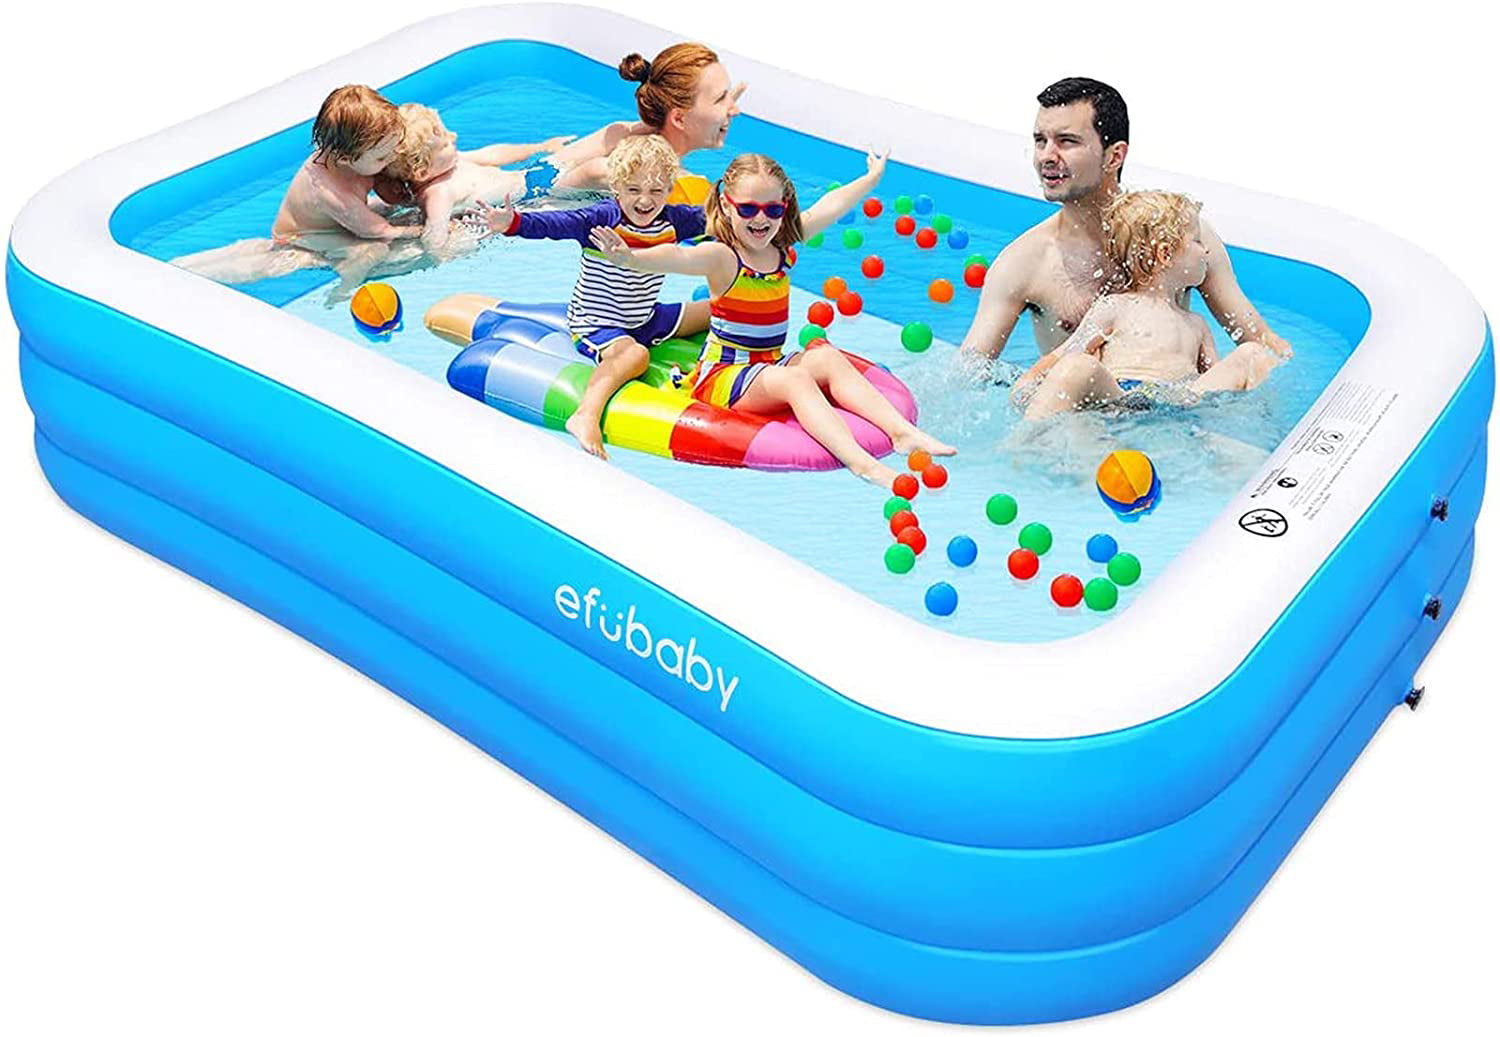 Swimming Inflatable Pool Adult Ages 3+ Outdoor Garden Backyard Ground Party 120 X 72 X 22 Full-Sized Swimming Pools Inflatable Kid Pools Blow up Pool Toddler Pool Family Pool for Baby Kiddie 